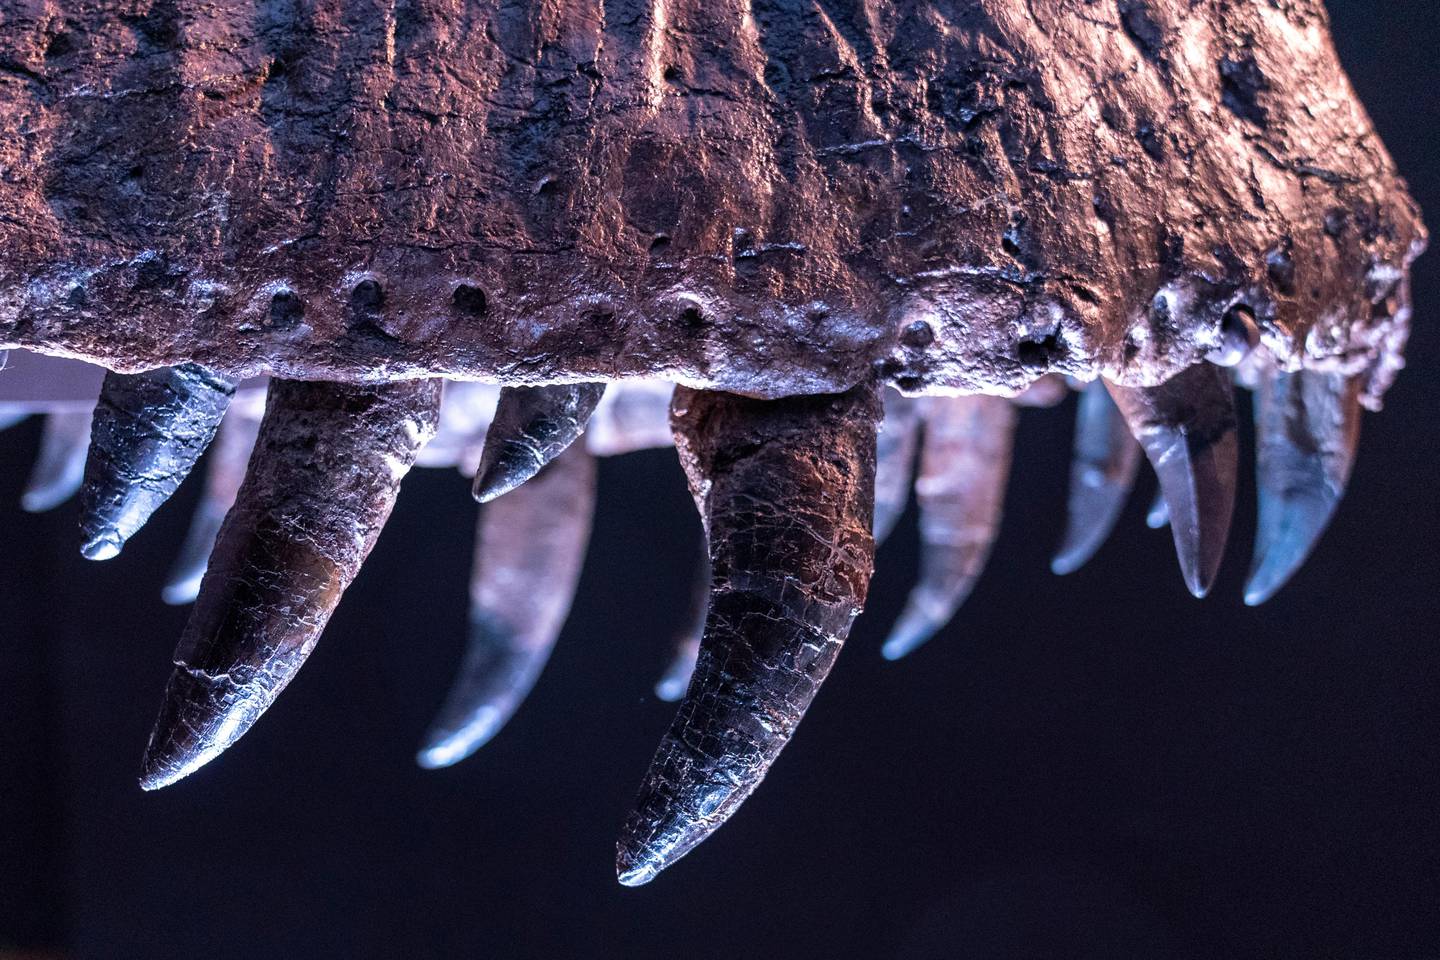 A detail of Stan's teeth, one of the largest and most complete Tyrannosaurus rex fossil discovered, is on display, Tuesday, Sept. 15, 2020, at Christie's in New York. The T. rex named after the paleontologist who first found the skeleton's partially unearthed hip bones, will be auction on Oct. 6, 2020 and will be on public view from Sept. 16 - Oct. 21, 2020 to pedestrians through Christie's floor-to- ceiling gallery windows and a limited number of in-gallery viewings by appointment. Stan's head on the completed display of is a casting of the original, which is too heavy for the display. (AP Photo/Mary Altaffer)